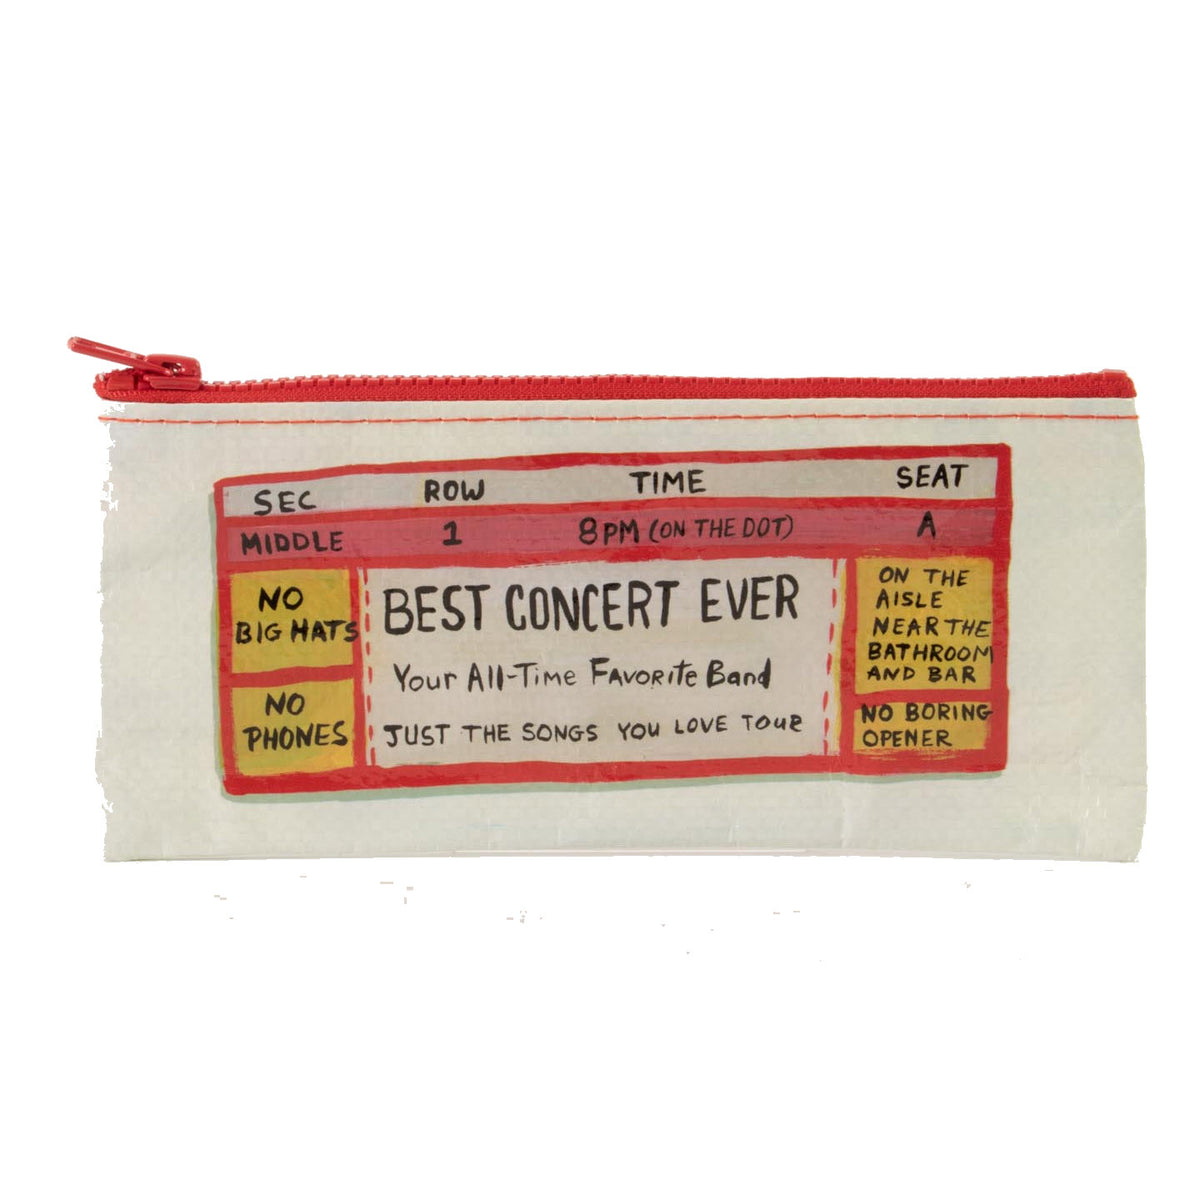 A cool BLUE Q pencil case designed to resemble a concert ticket with humorous details.